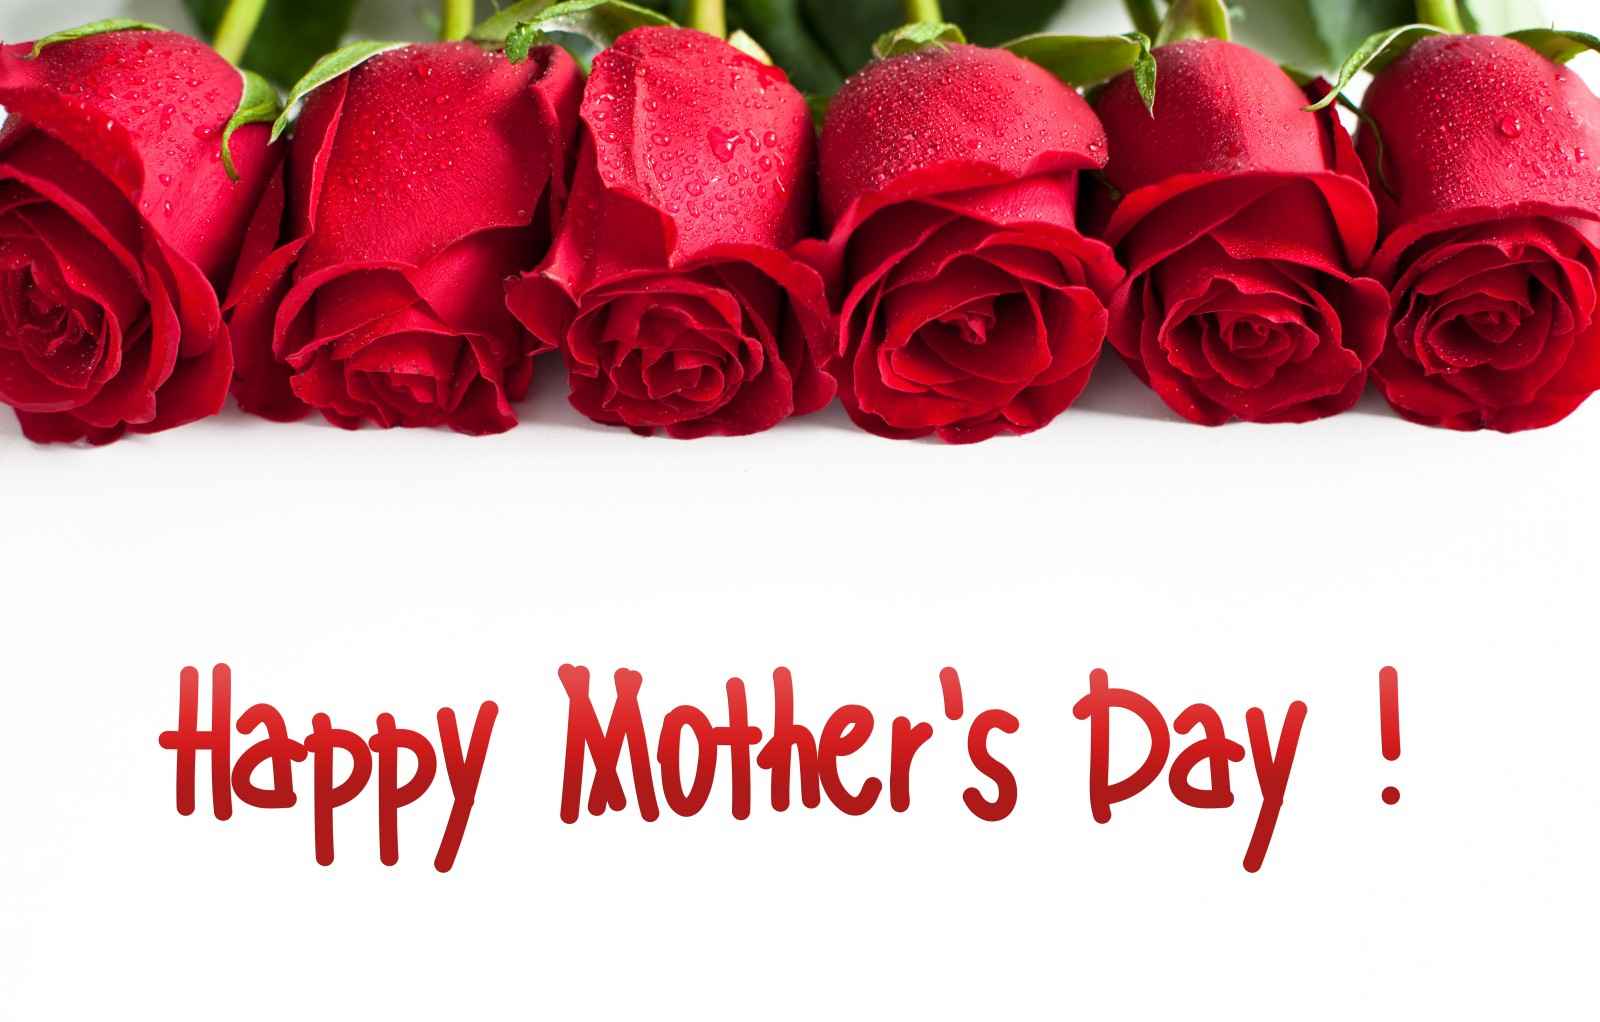 Happy-Mothers-Day-2019-Wishes-Images-Greetings-Quotes-11 - Sacred ...